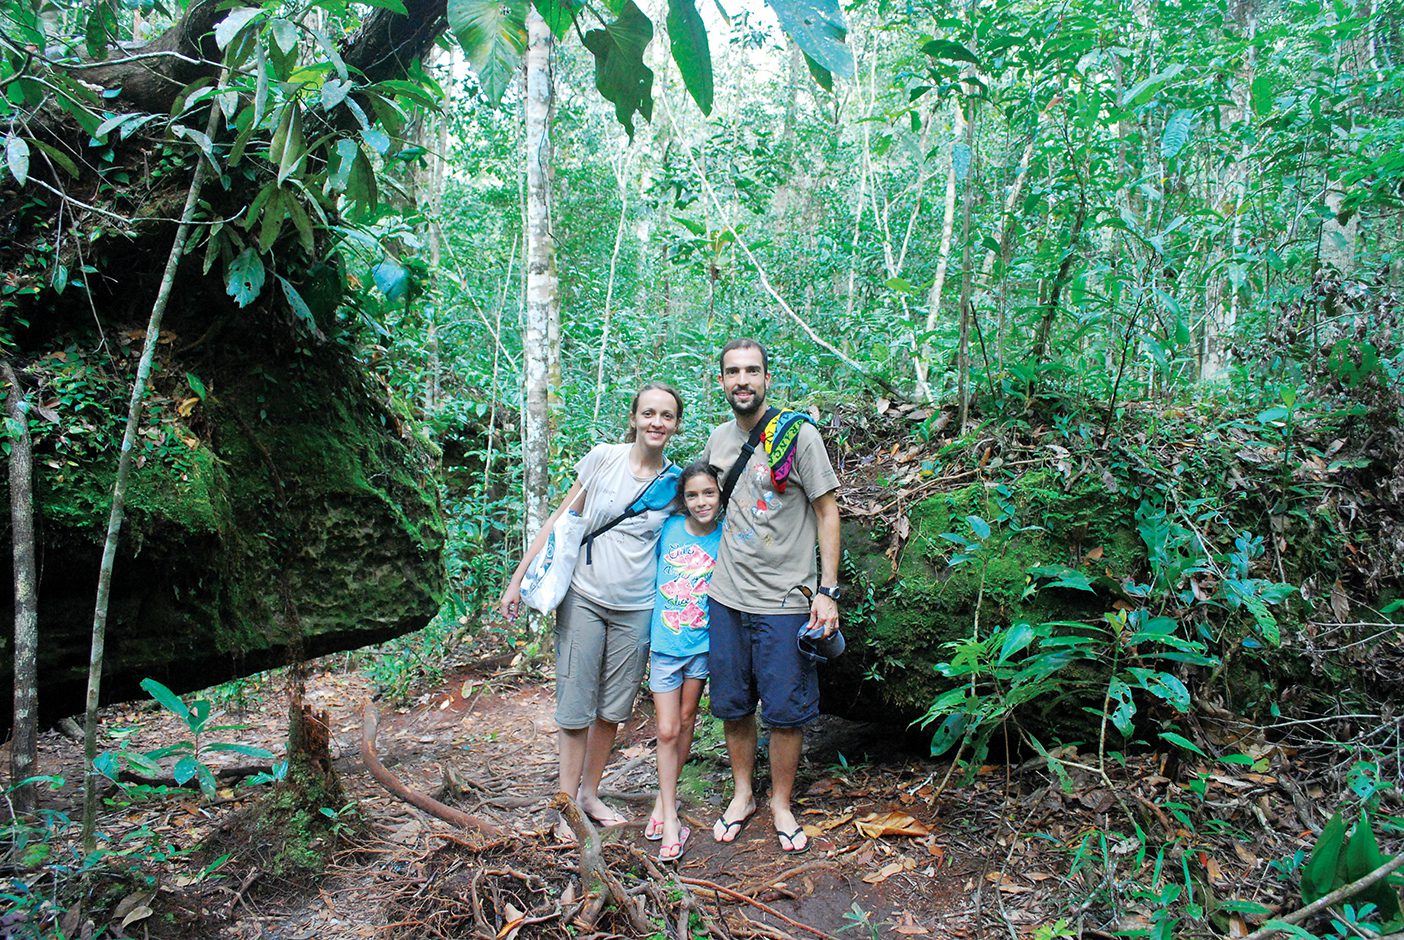 Fernanda Werneck and Rafael Leite, scientists at the National Institute for Amazon Research in Manaus, Brazil, stand in a patch of Amazon forest with their daughter, Iara.